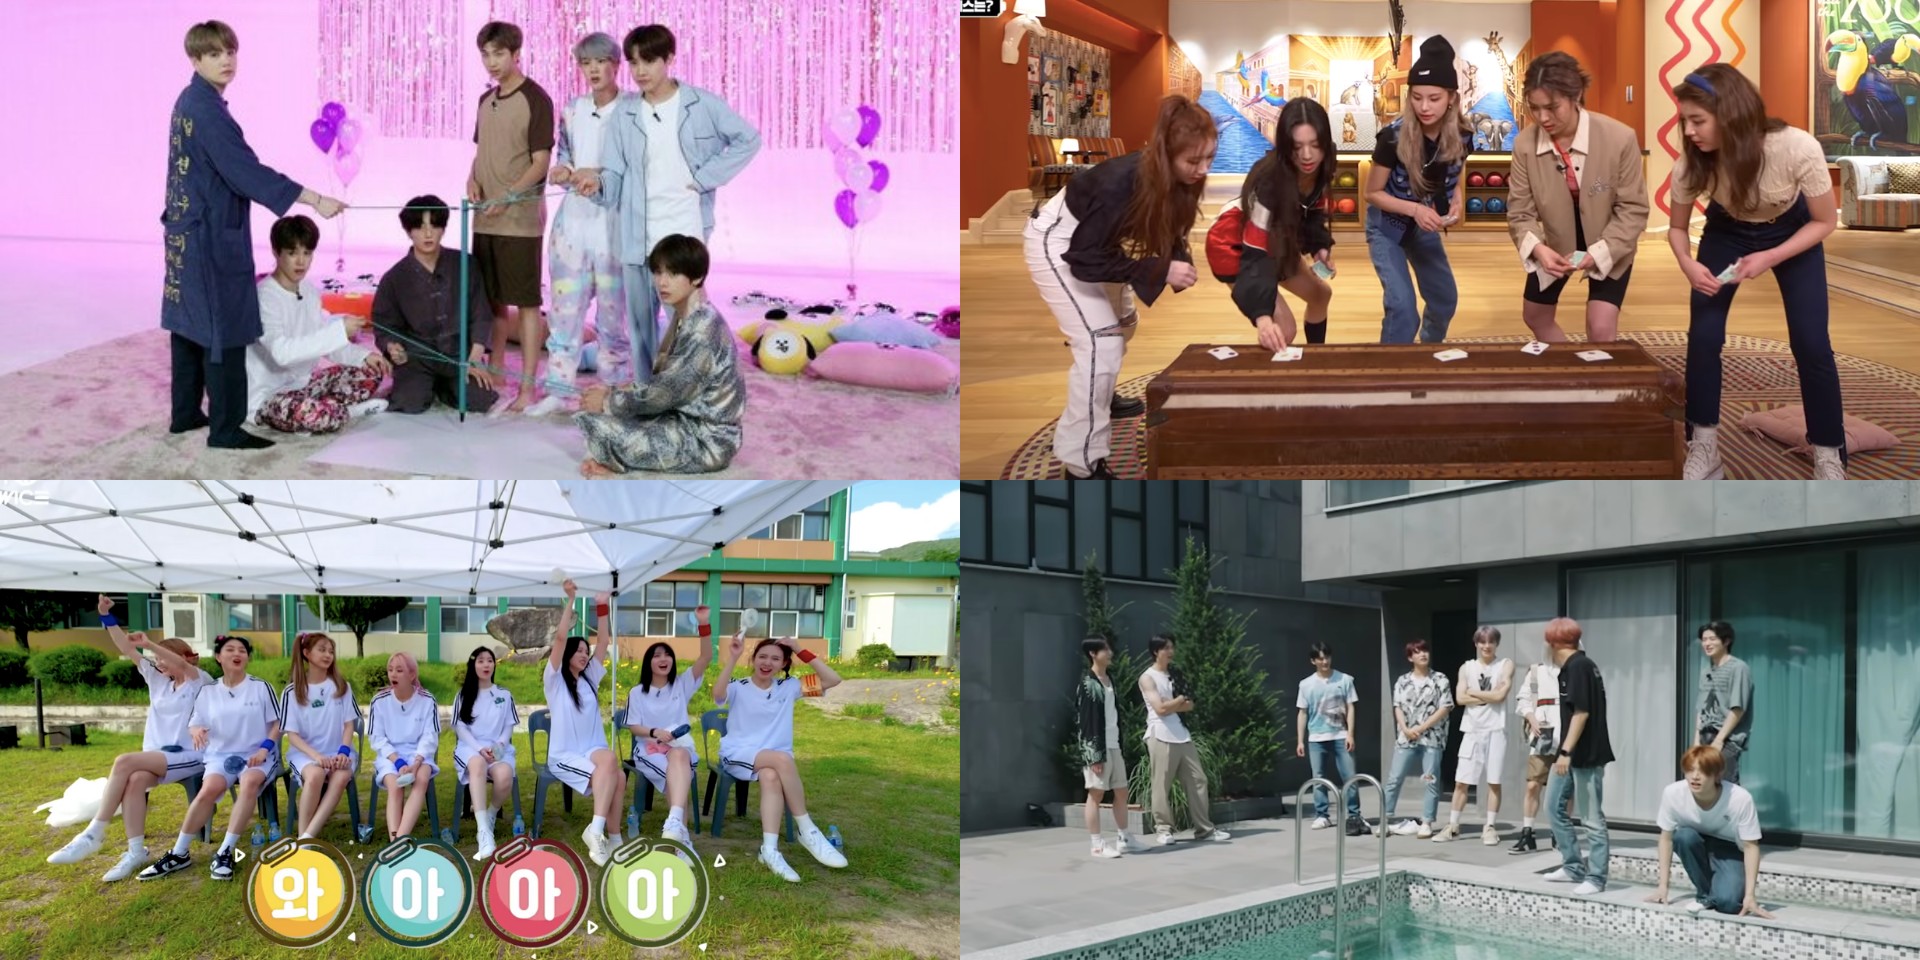 7 Korean idol variety shows you need to watch – Run BTS!, TIME TO TWICE, NCT Life, and more